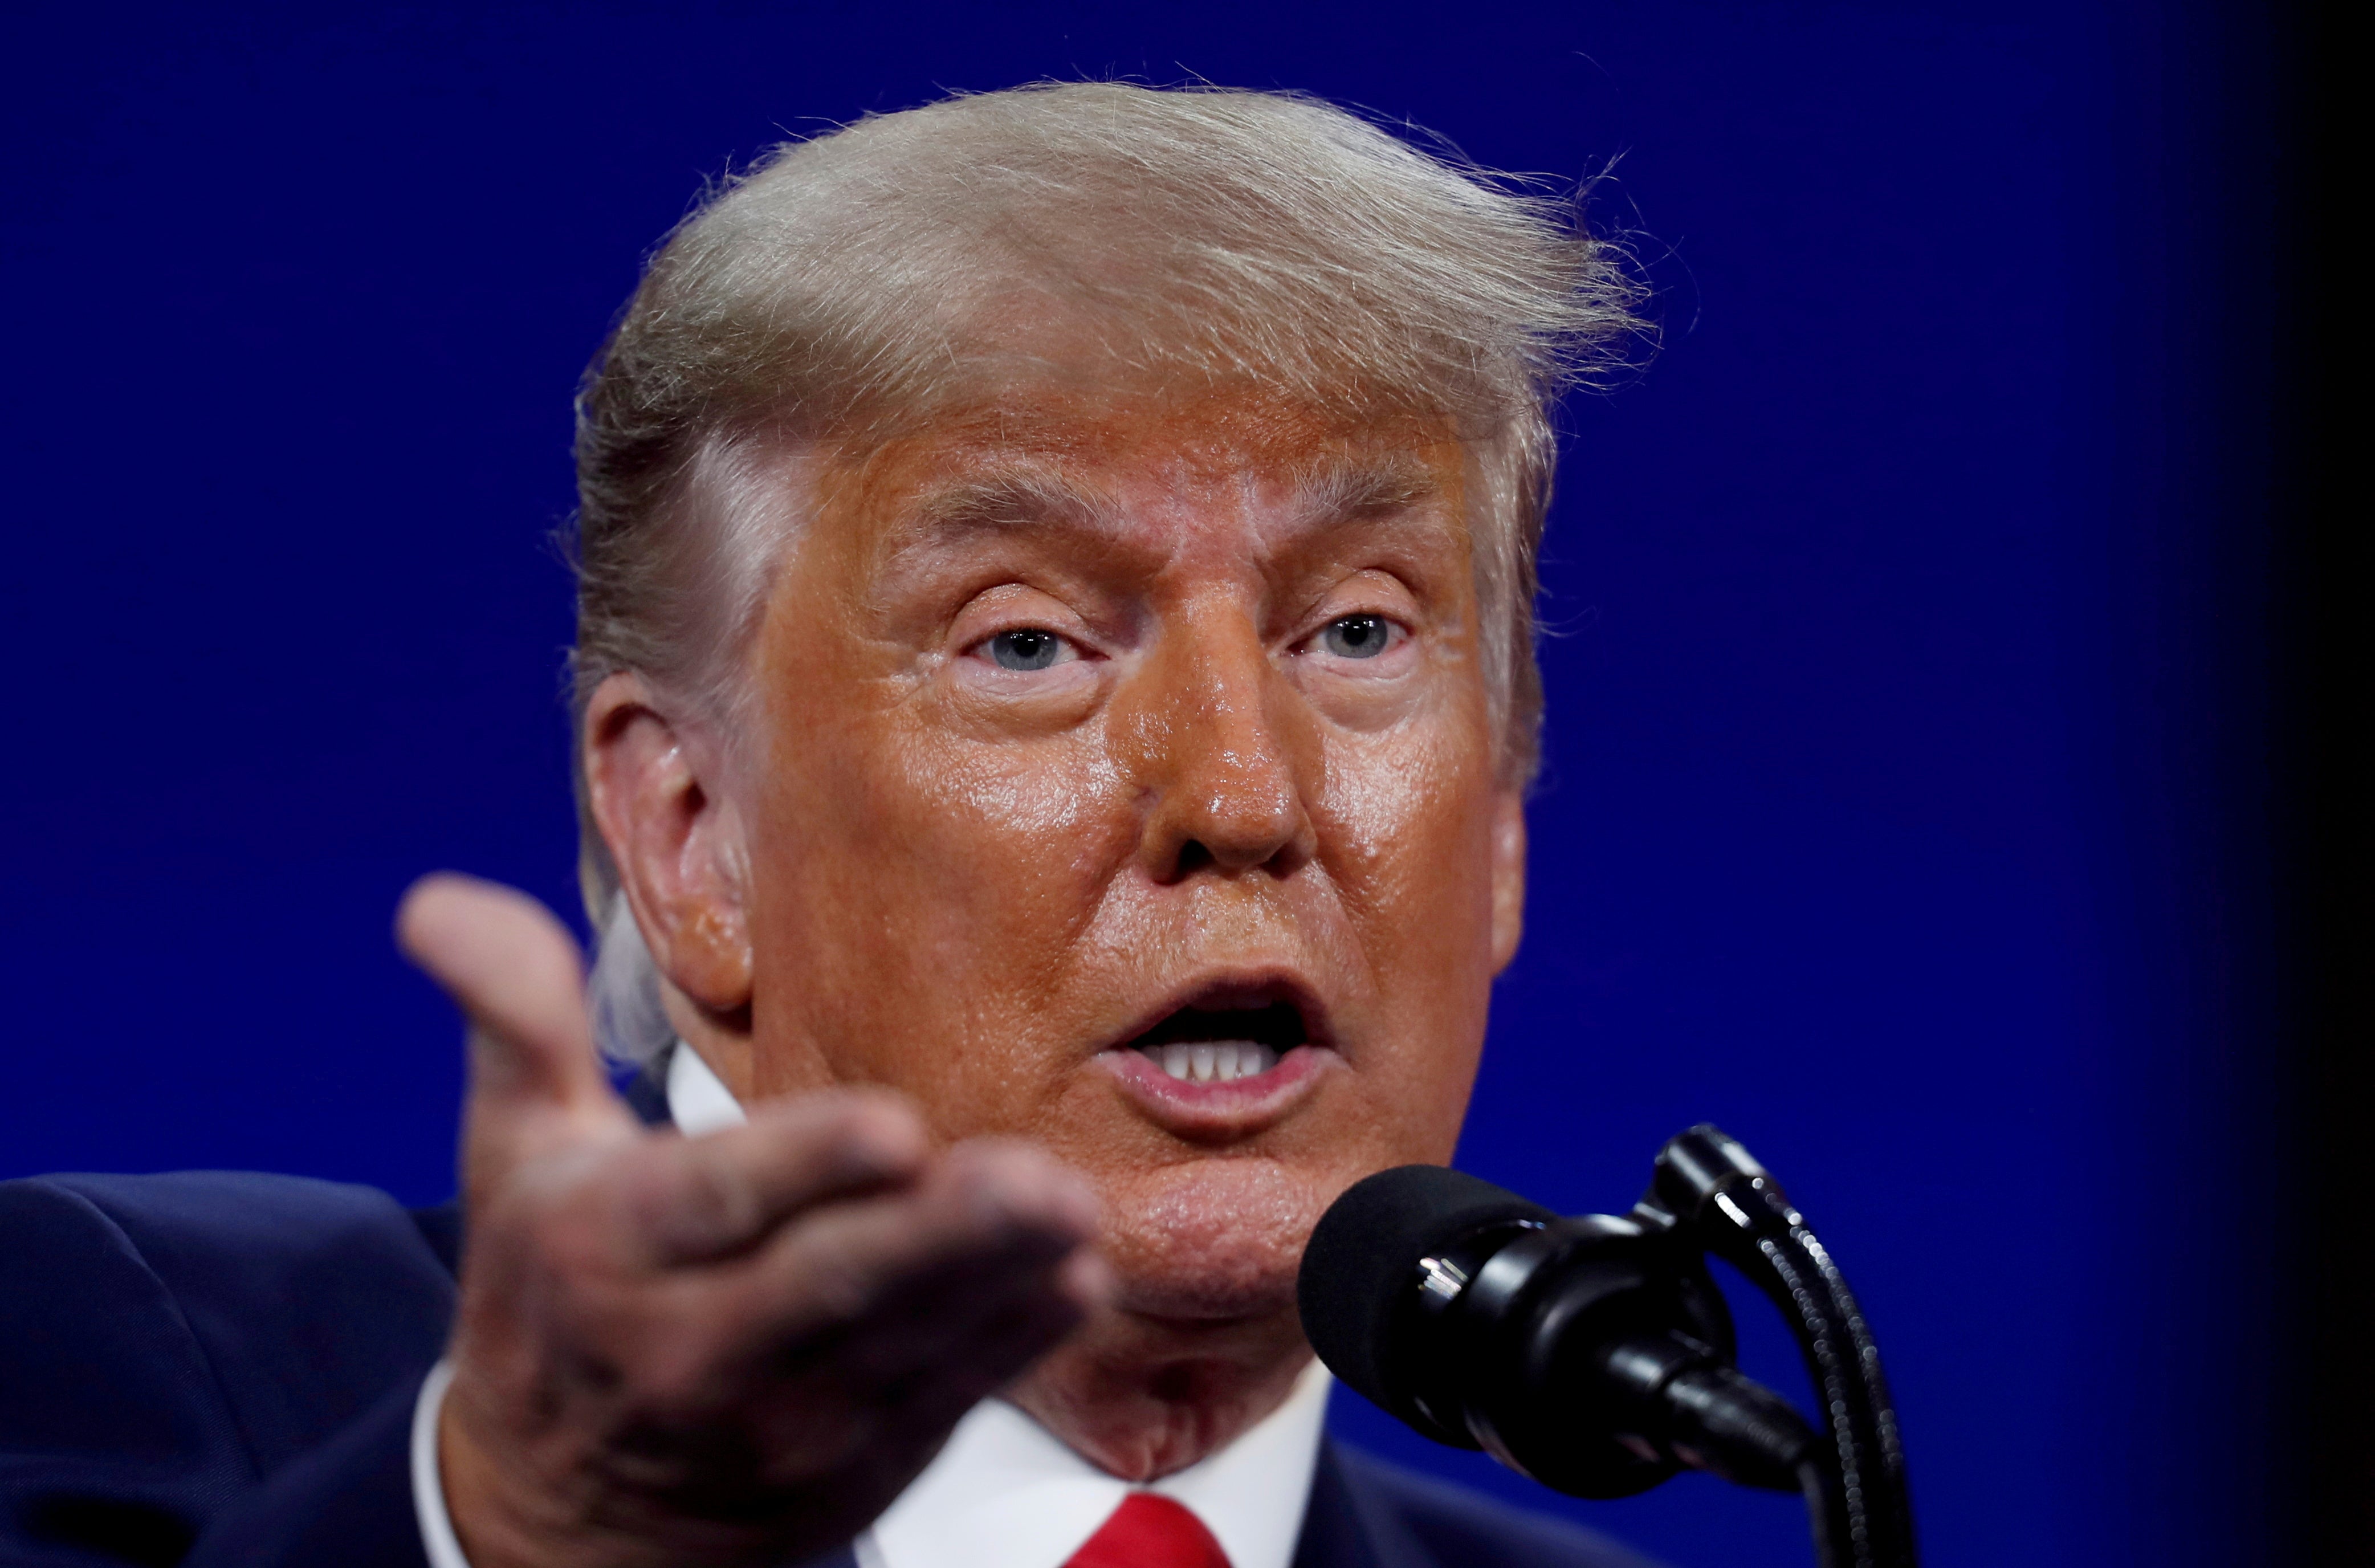 File image: Former US president Donald Trump speaks at the Conservative Political Action Conference (CPAC) in Orlando, Florida